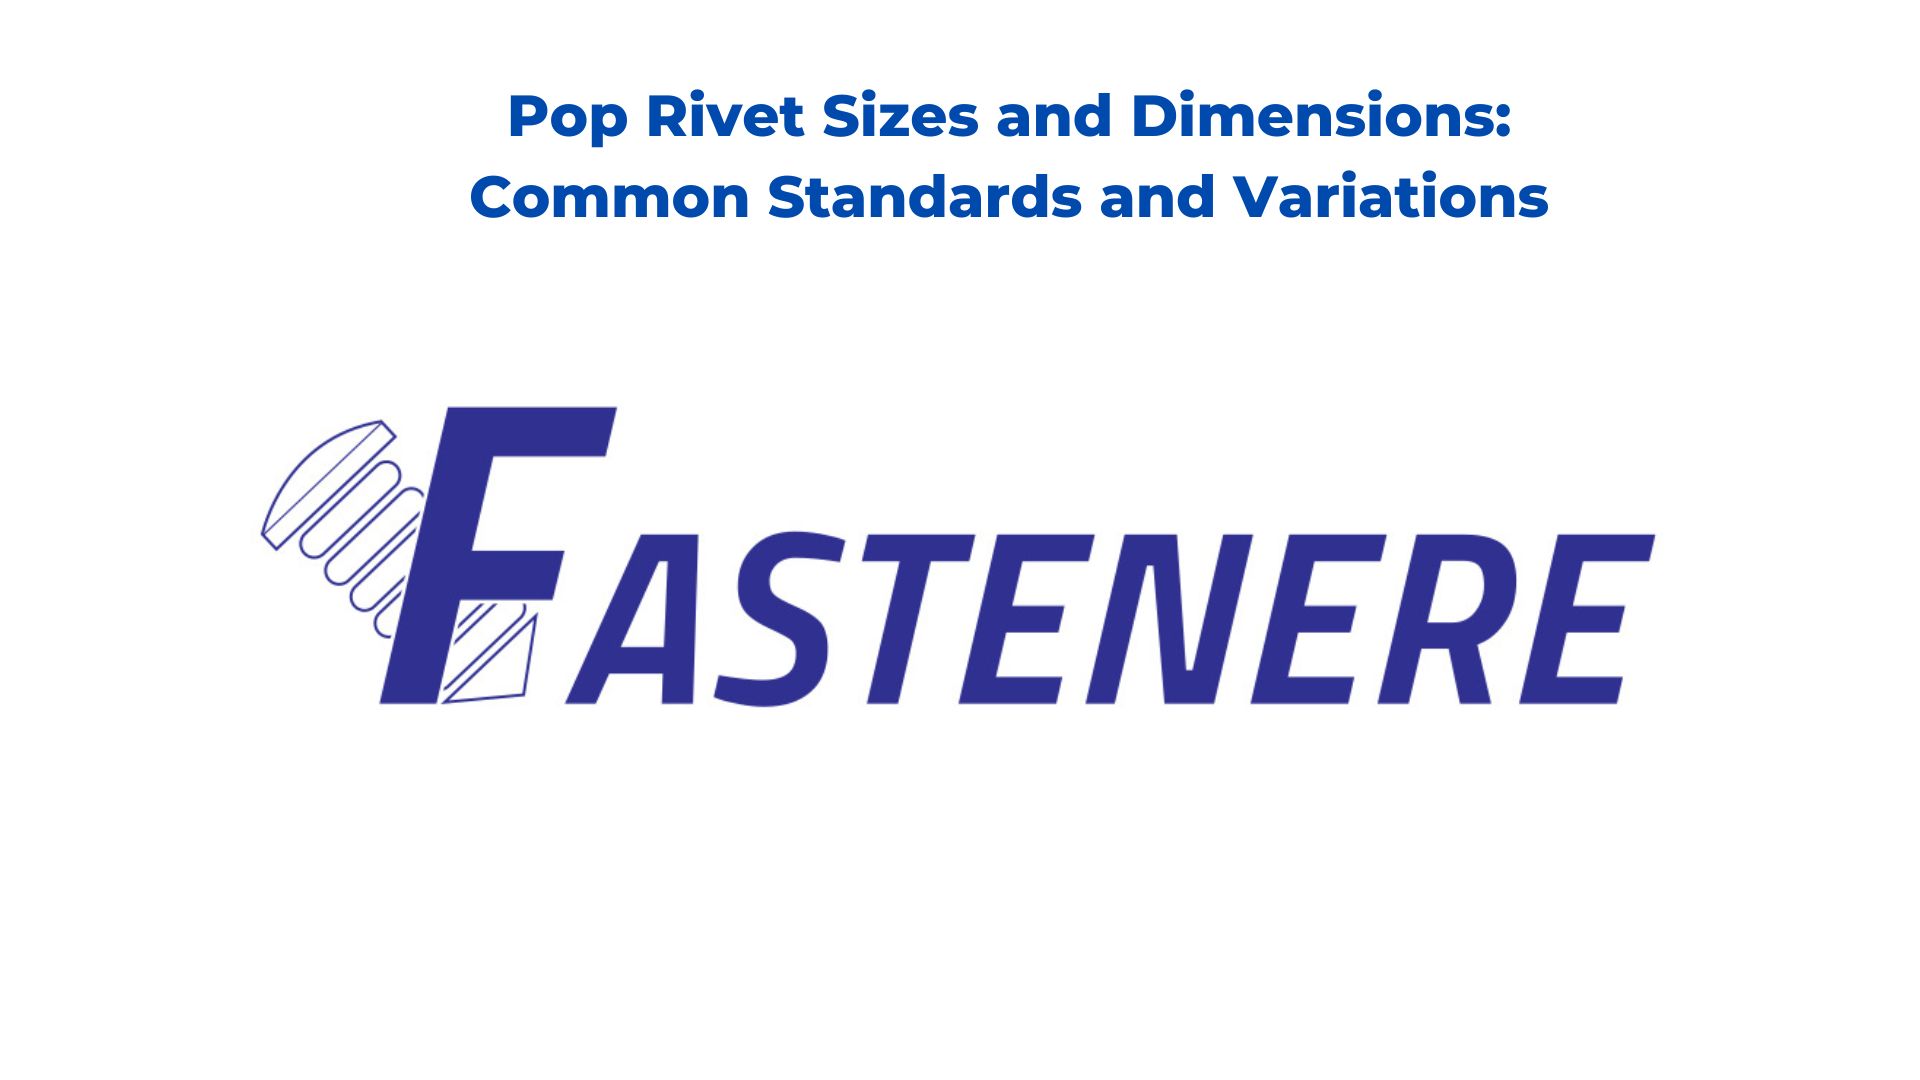 Pop Rivet Sizes and Dimensions: Common Standards and Variations